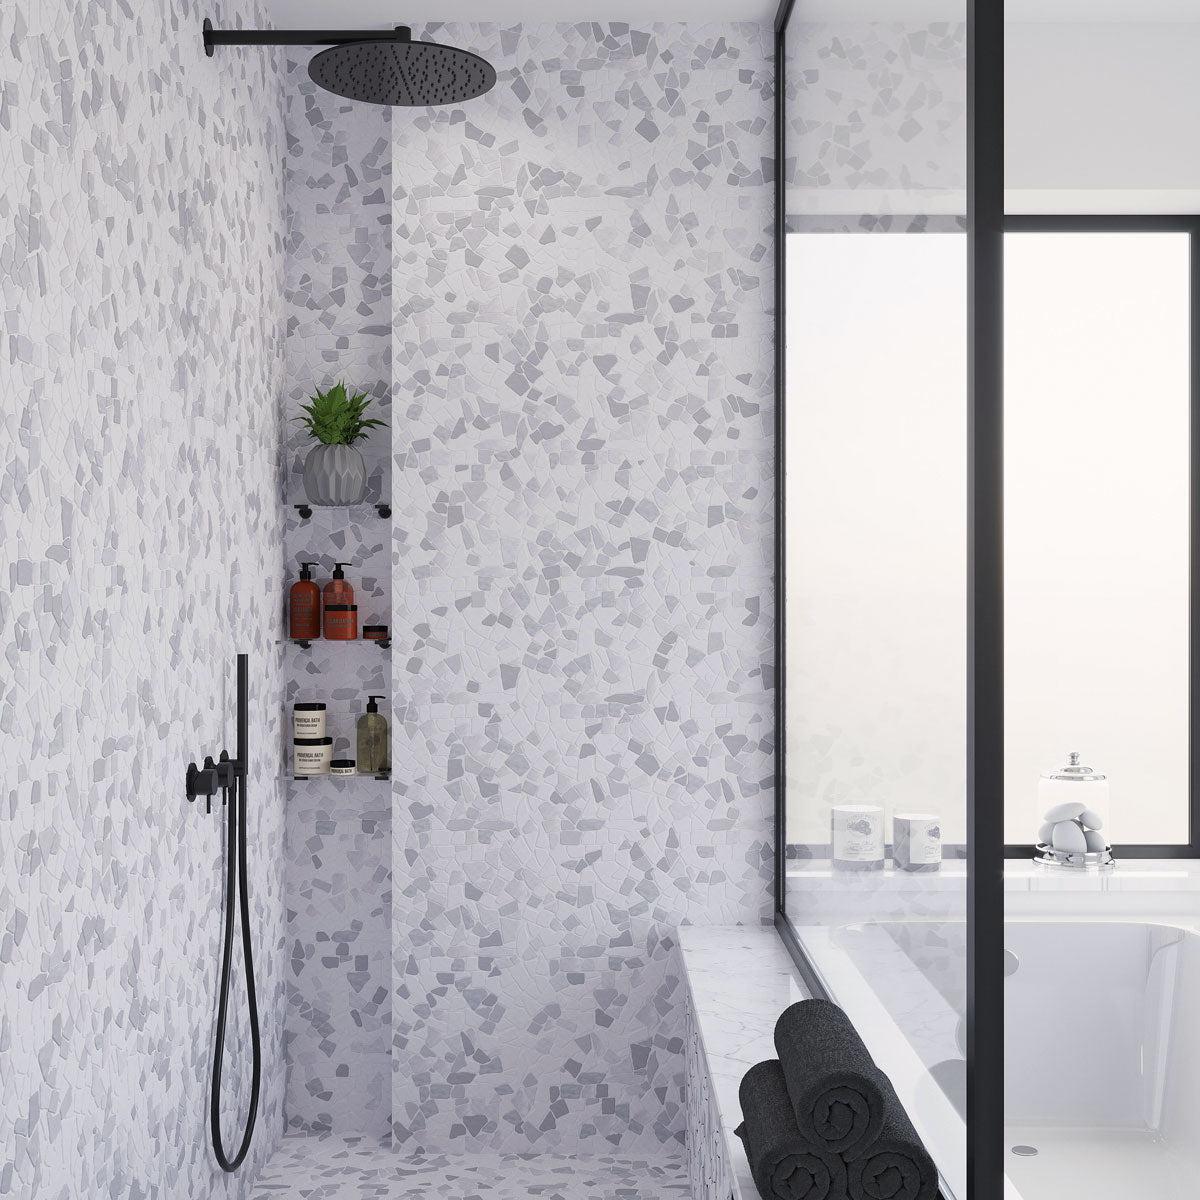 River Rock Bathroom Shower Wall and Floor with Marble Pebbles Tile